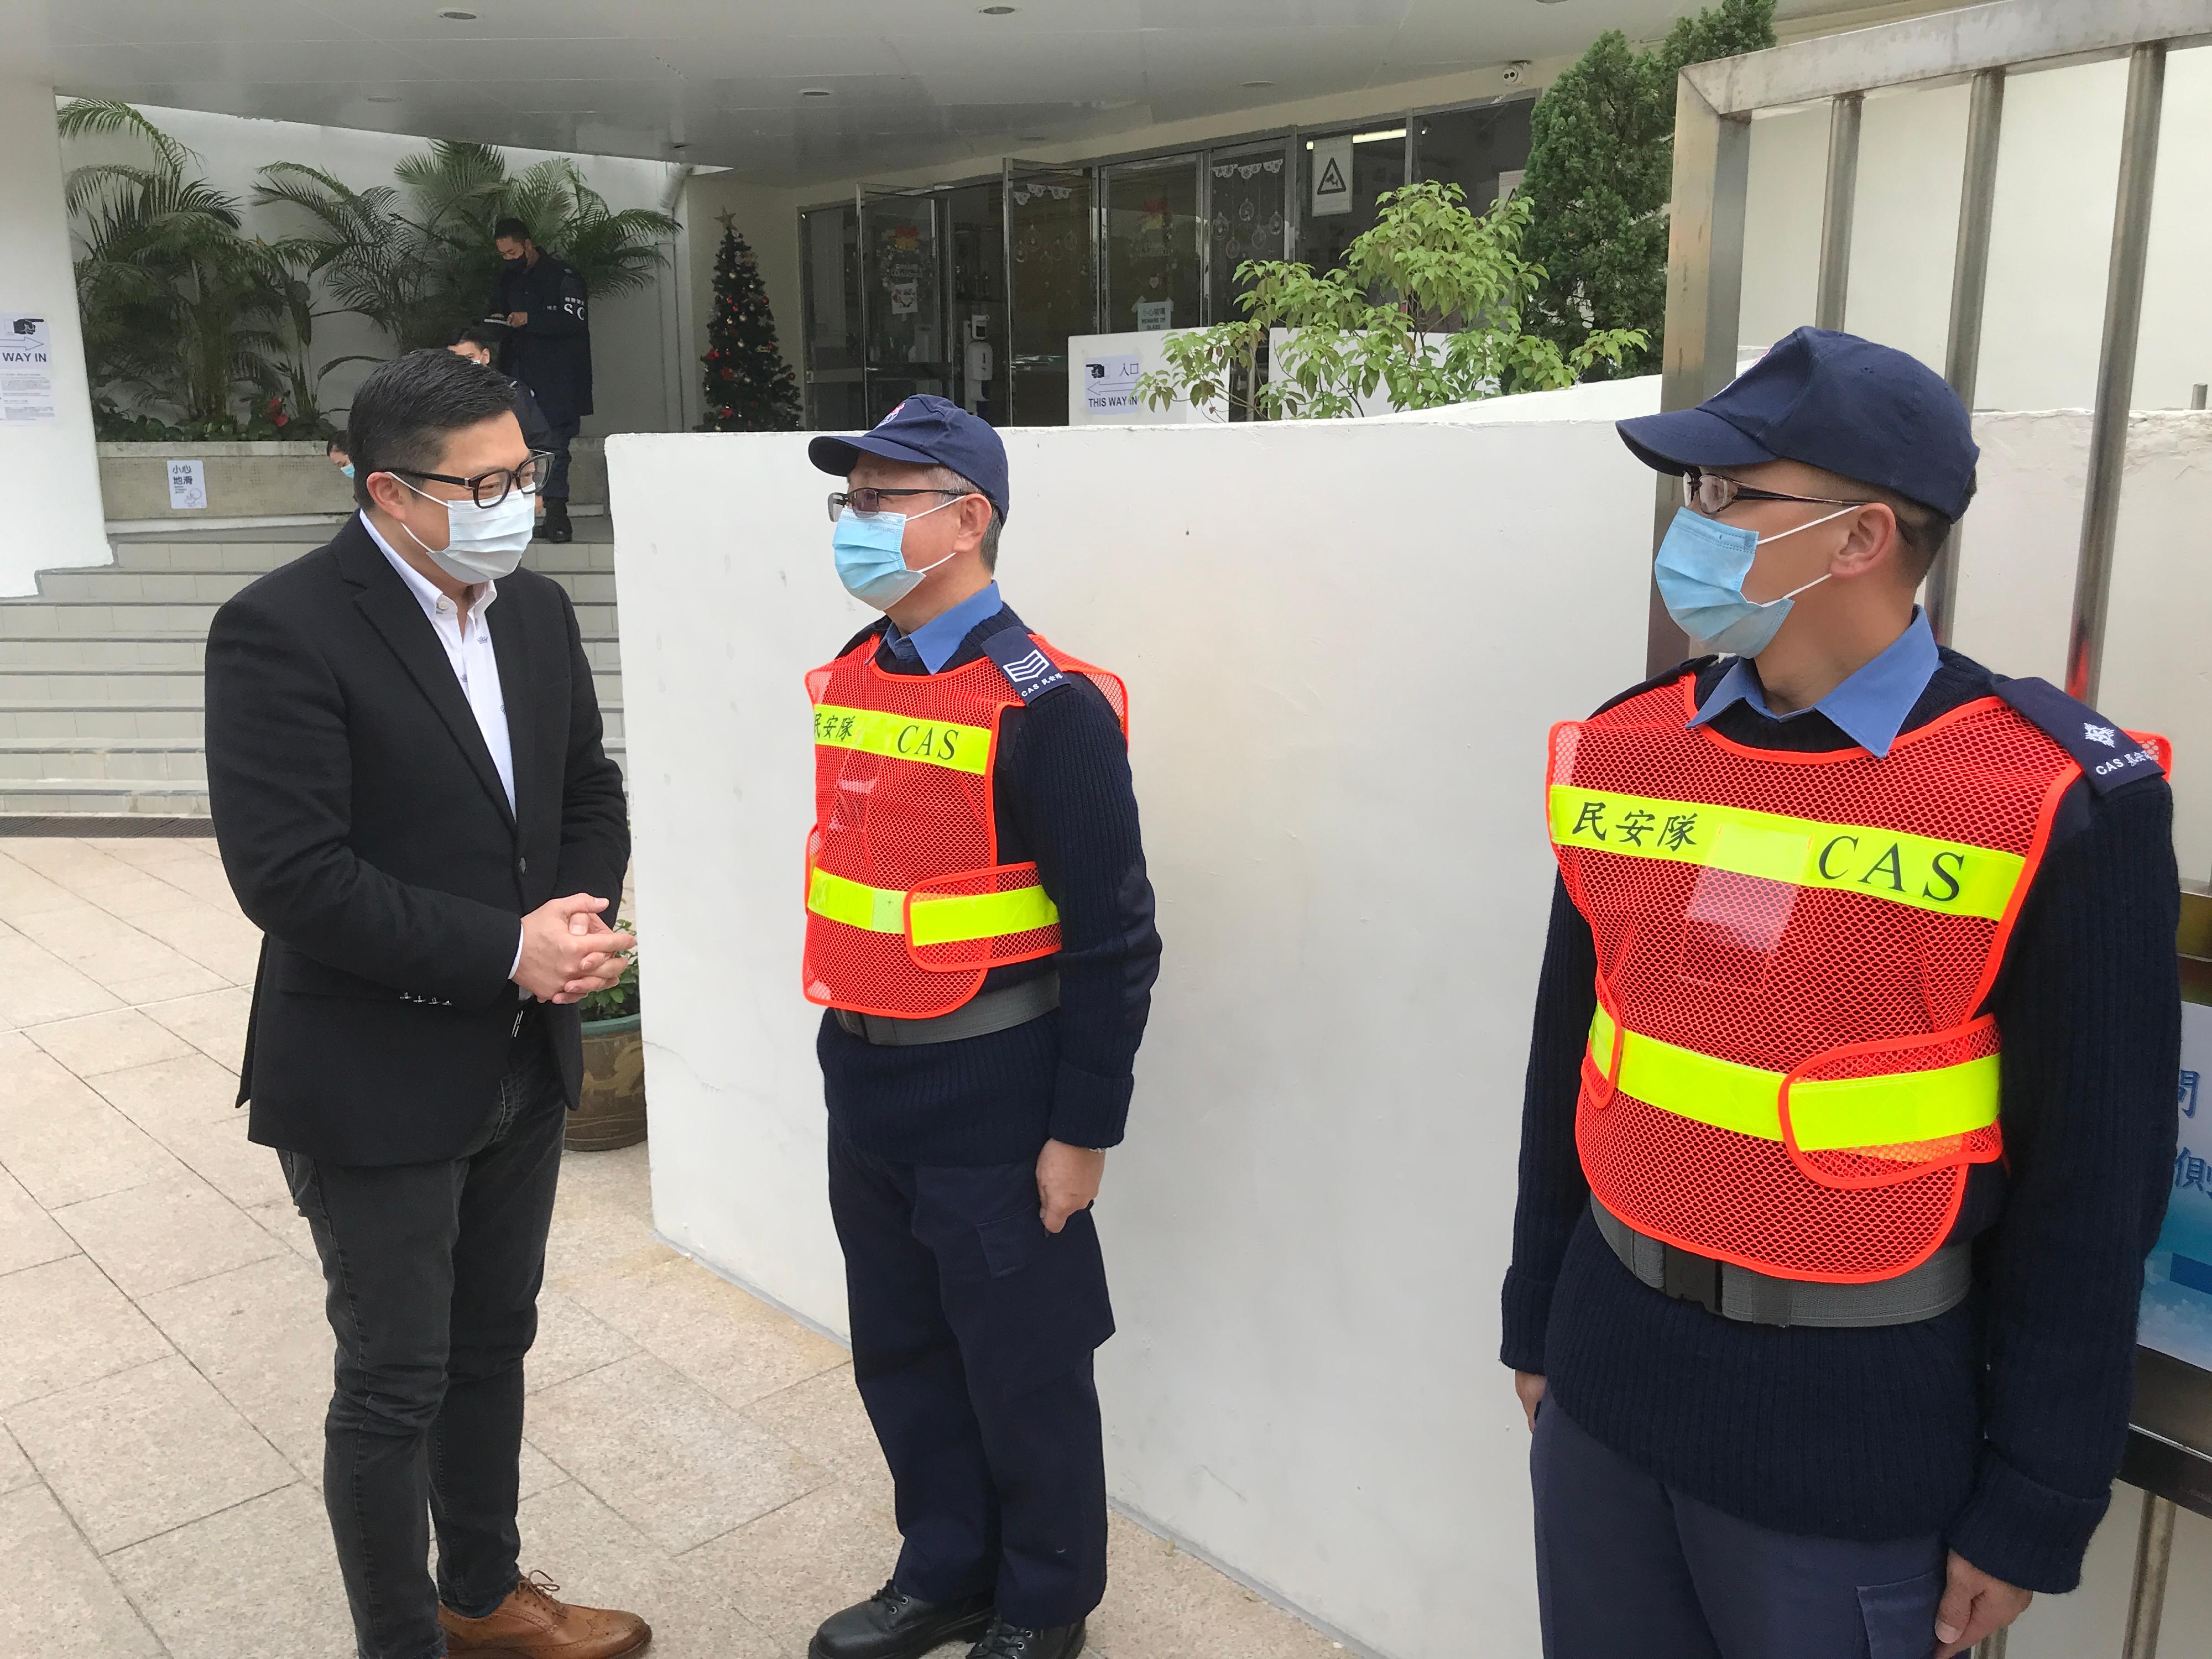 The 2021 Legislative Council General Election is held today (December 19). The Secretary for Security, Mr Tang Ping-keung, visited polling stations in various districts and the Emergency Monitoring and Support Centre of the Security Bureau activated for the election soon after he voted this morning to ensure safe and orderly conduct of the election. Photo shows Mr Tang (first left) having a conversation with Civil Aid Service's personnel on duty at a polling station in Kwai Chung and giving them words of encouragement.

